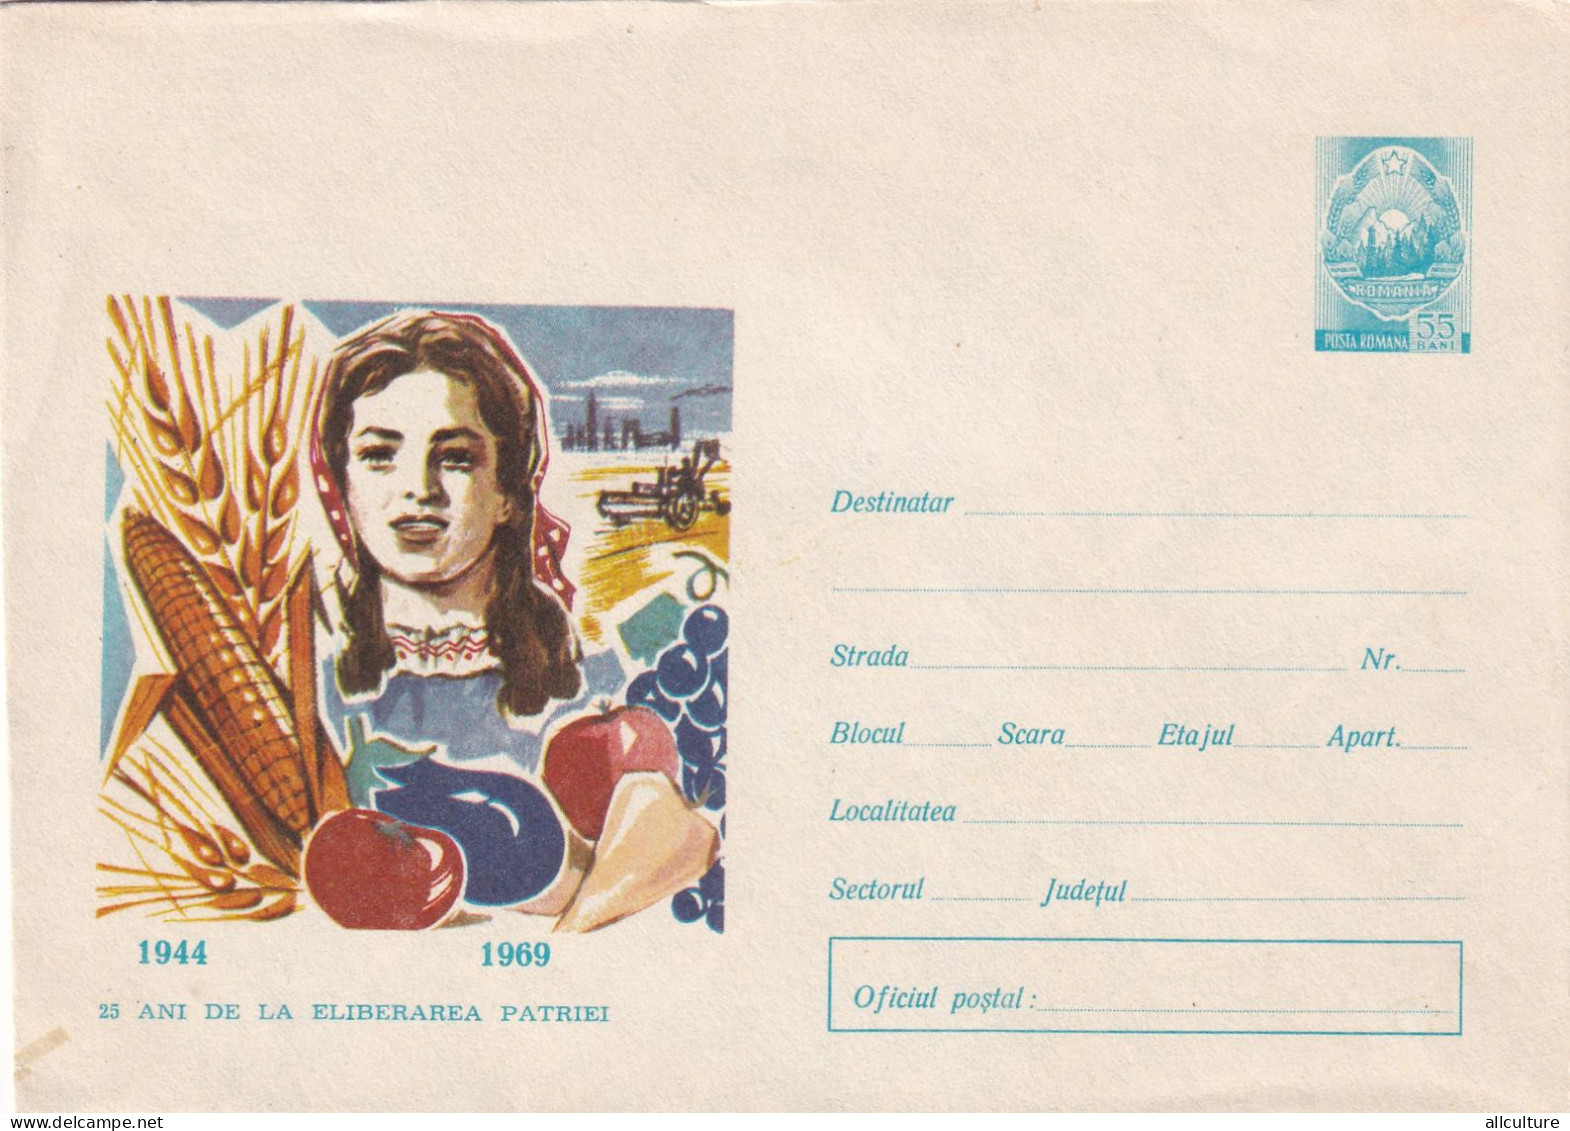 A24518 -  25 YEAR OF FREEDOM COUNTRY ROMANIA  1944 - 1969 COVER STATIONERY  1969  Romania - Postal Stationery